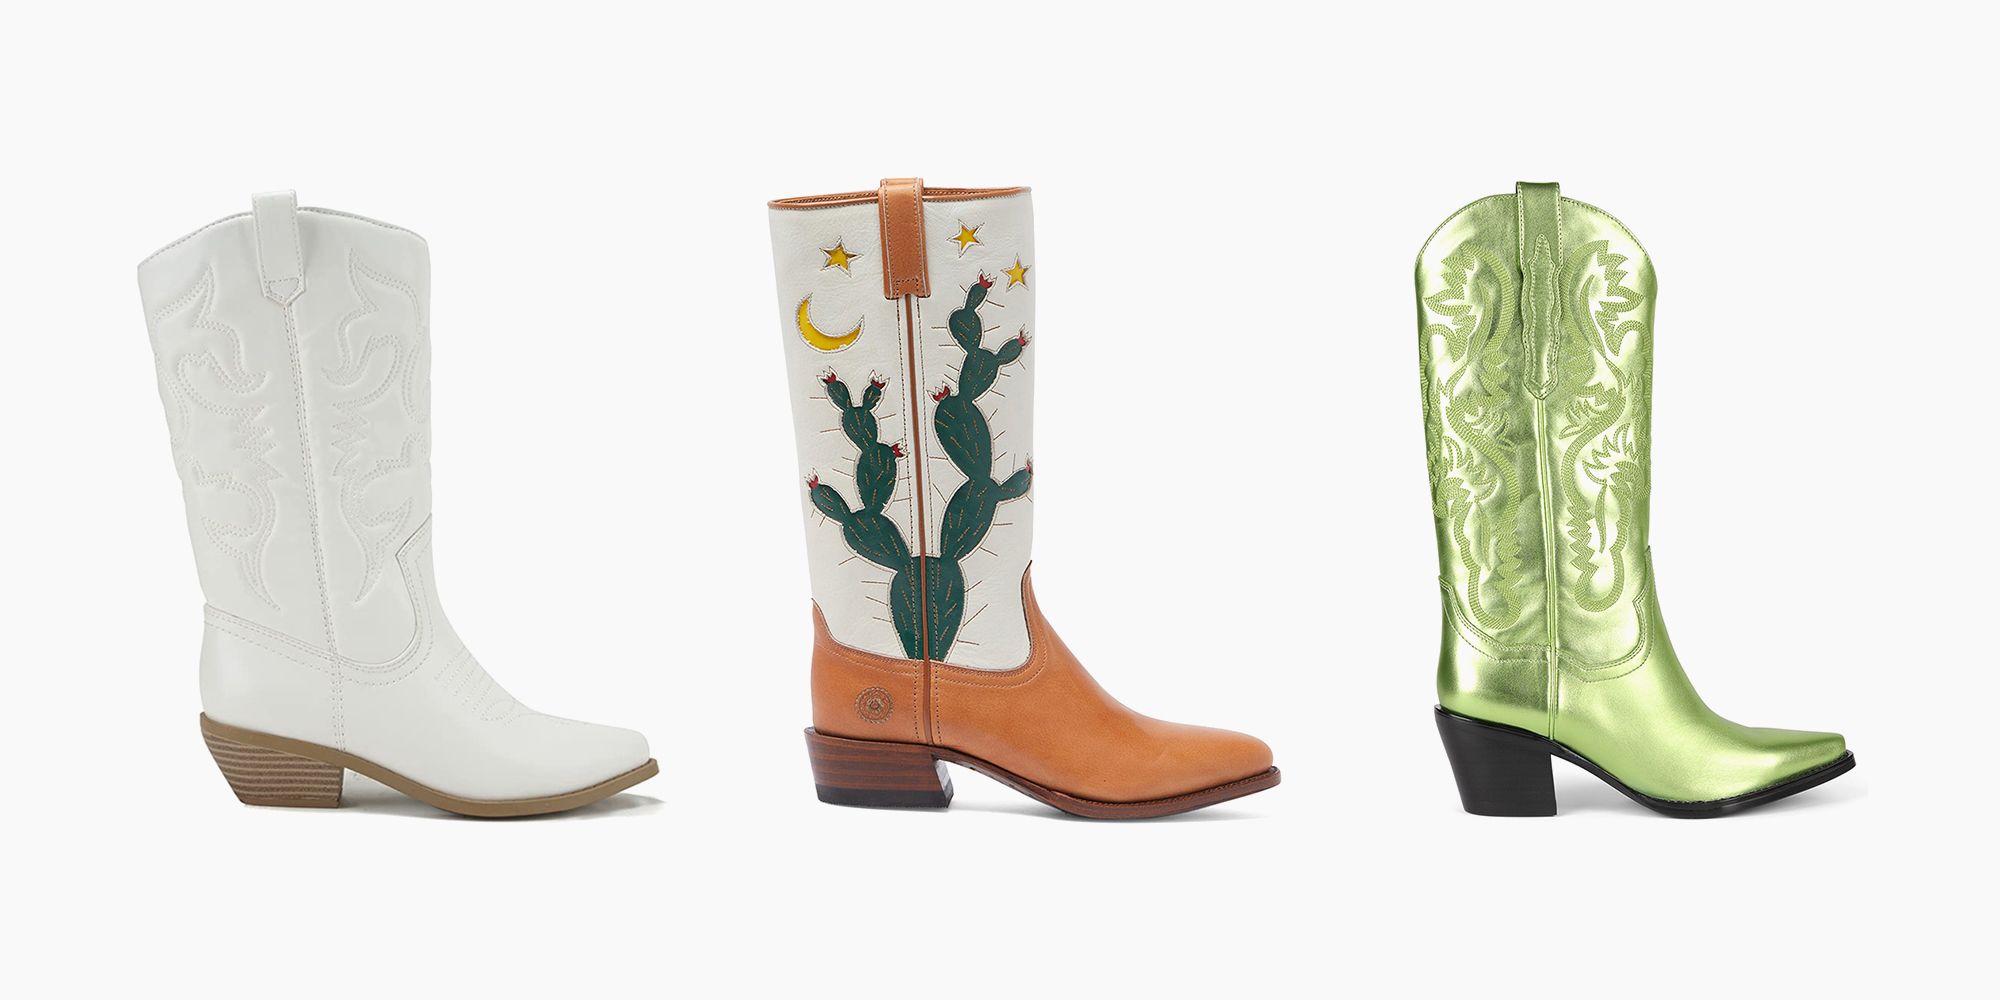 17 Perfect Pairs of Cowboy Boots That’ll Put Some Pep in Your Two-Step